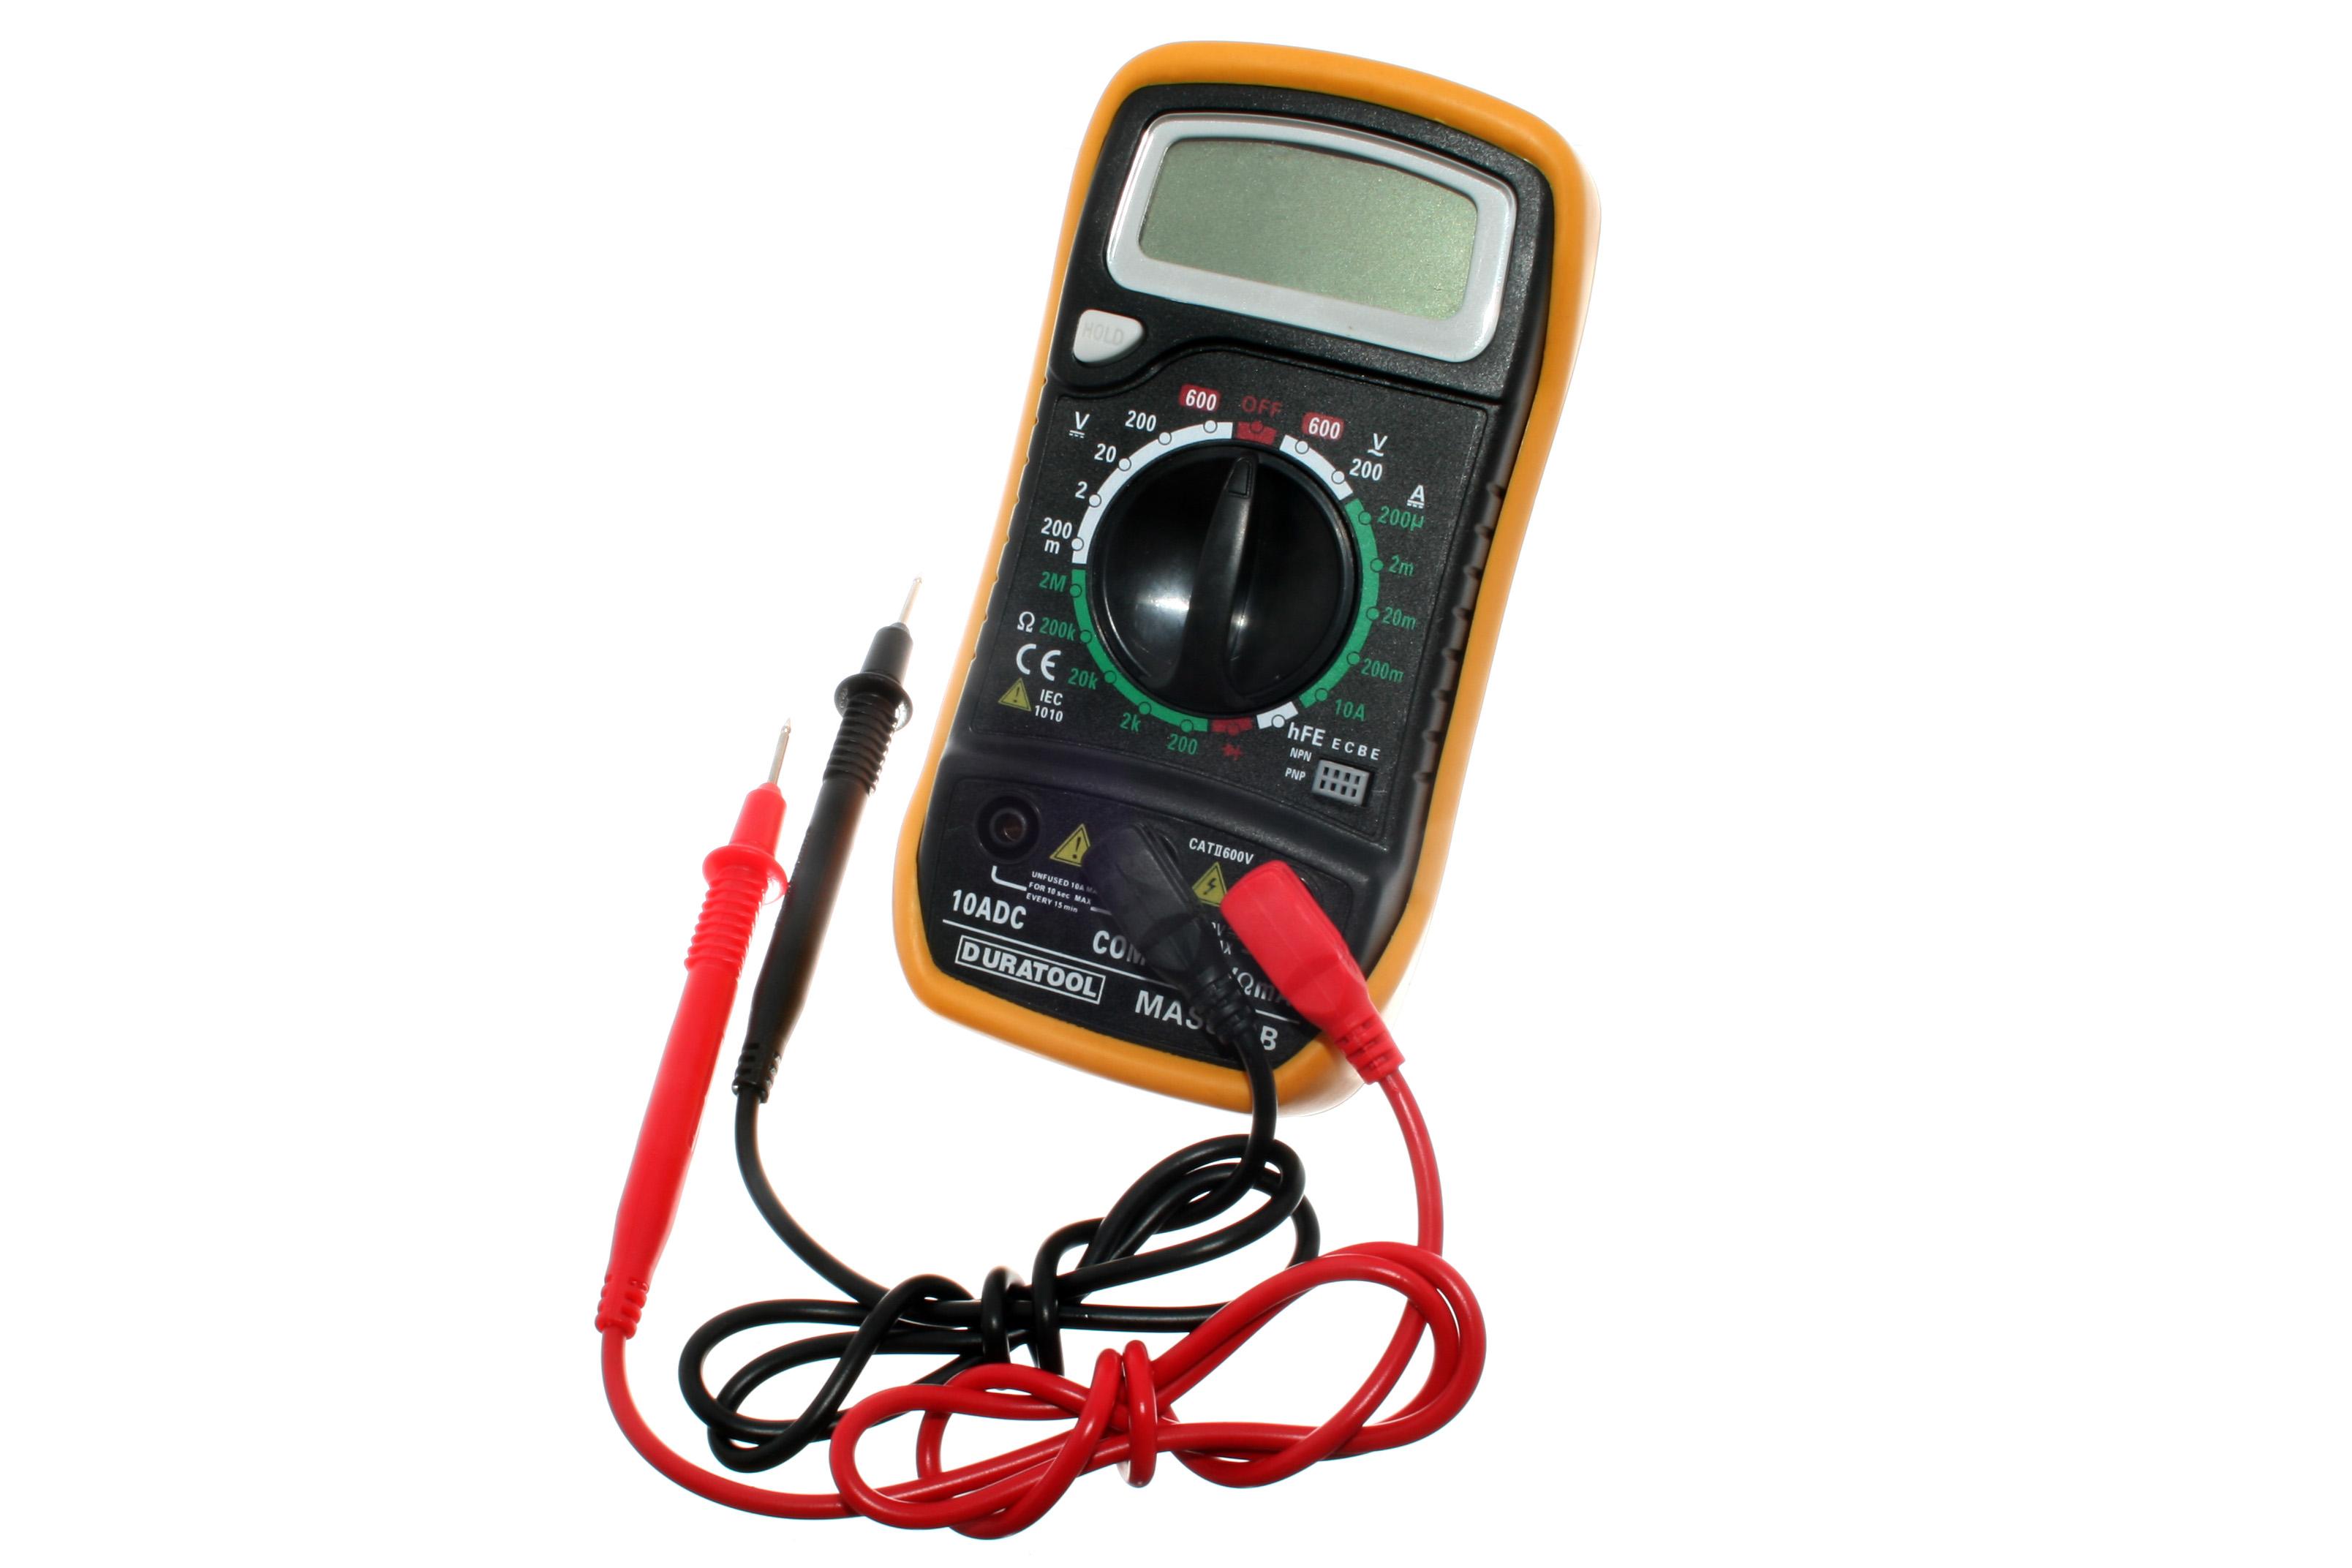 Choosing the Right Multimeter for Your Needs